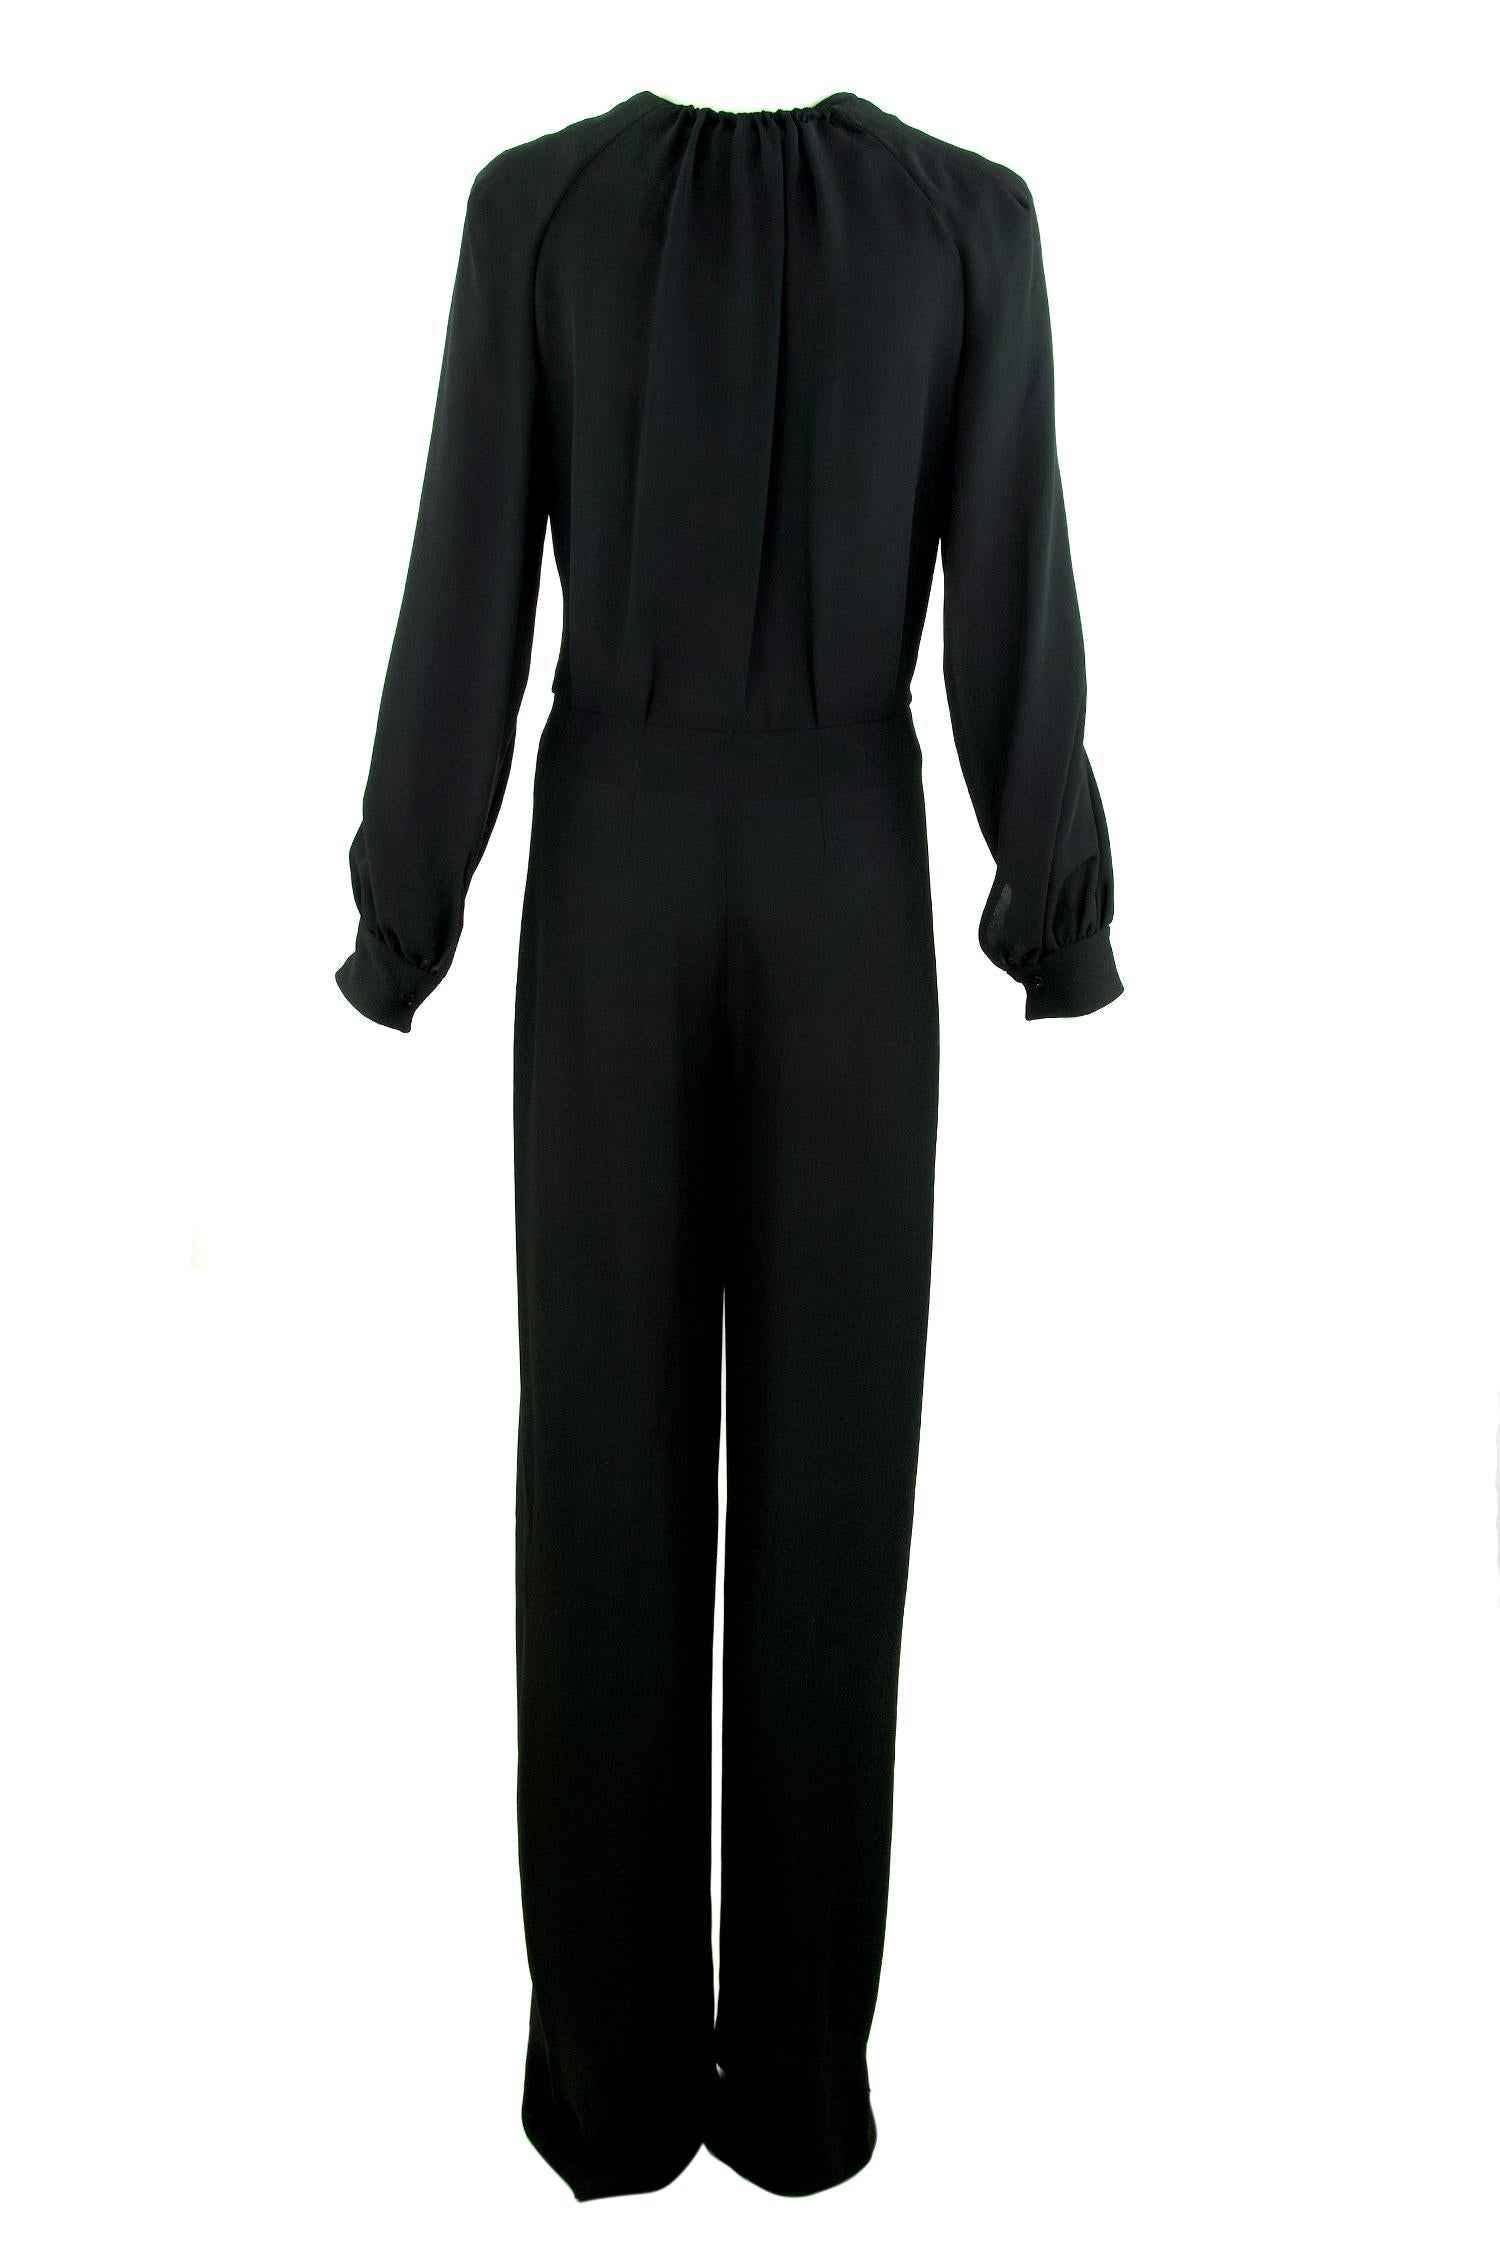 Chloe Black Low V-Neck Jumpsuit - Size FR  38 In Excellent Condition For Sale In Newport, RI